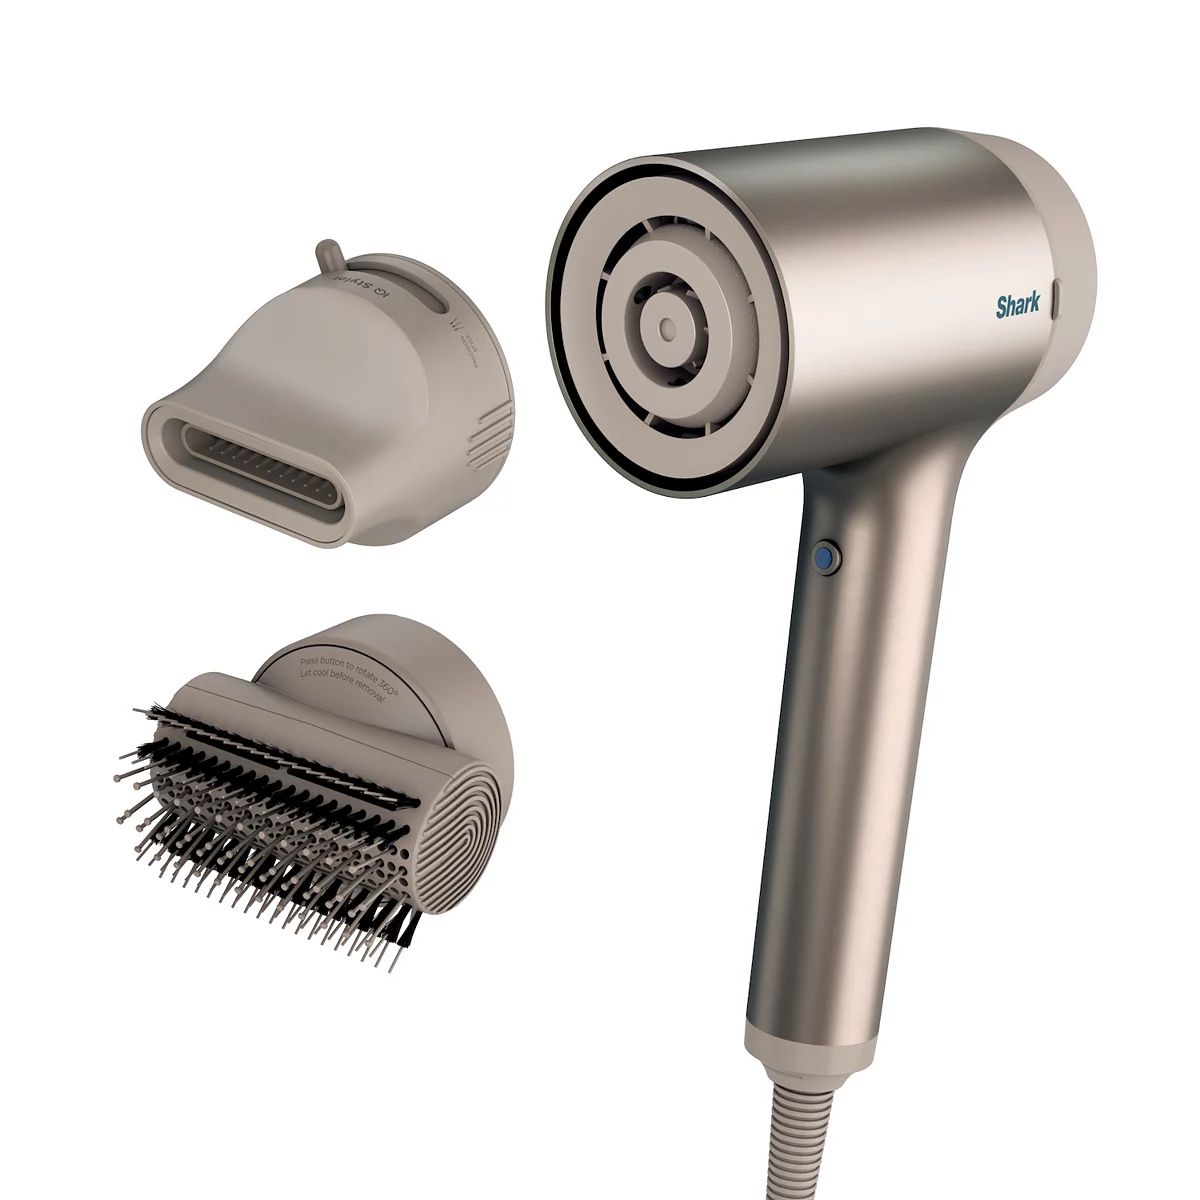 Shark® HyperAIR Ionic Hair Dryer with IQ 2-in-1 Concentrator & Styling Brush Attachments | Kohl's